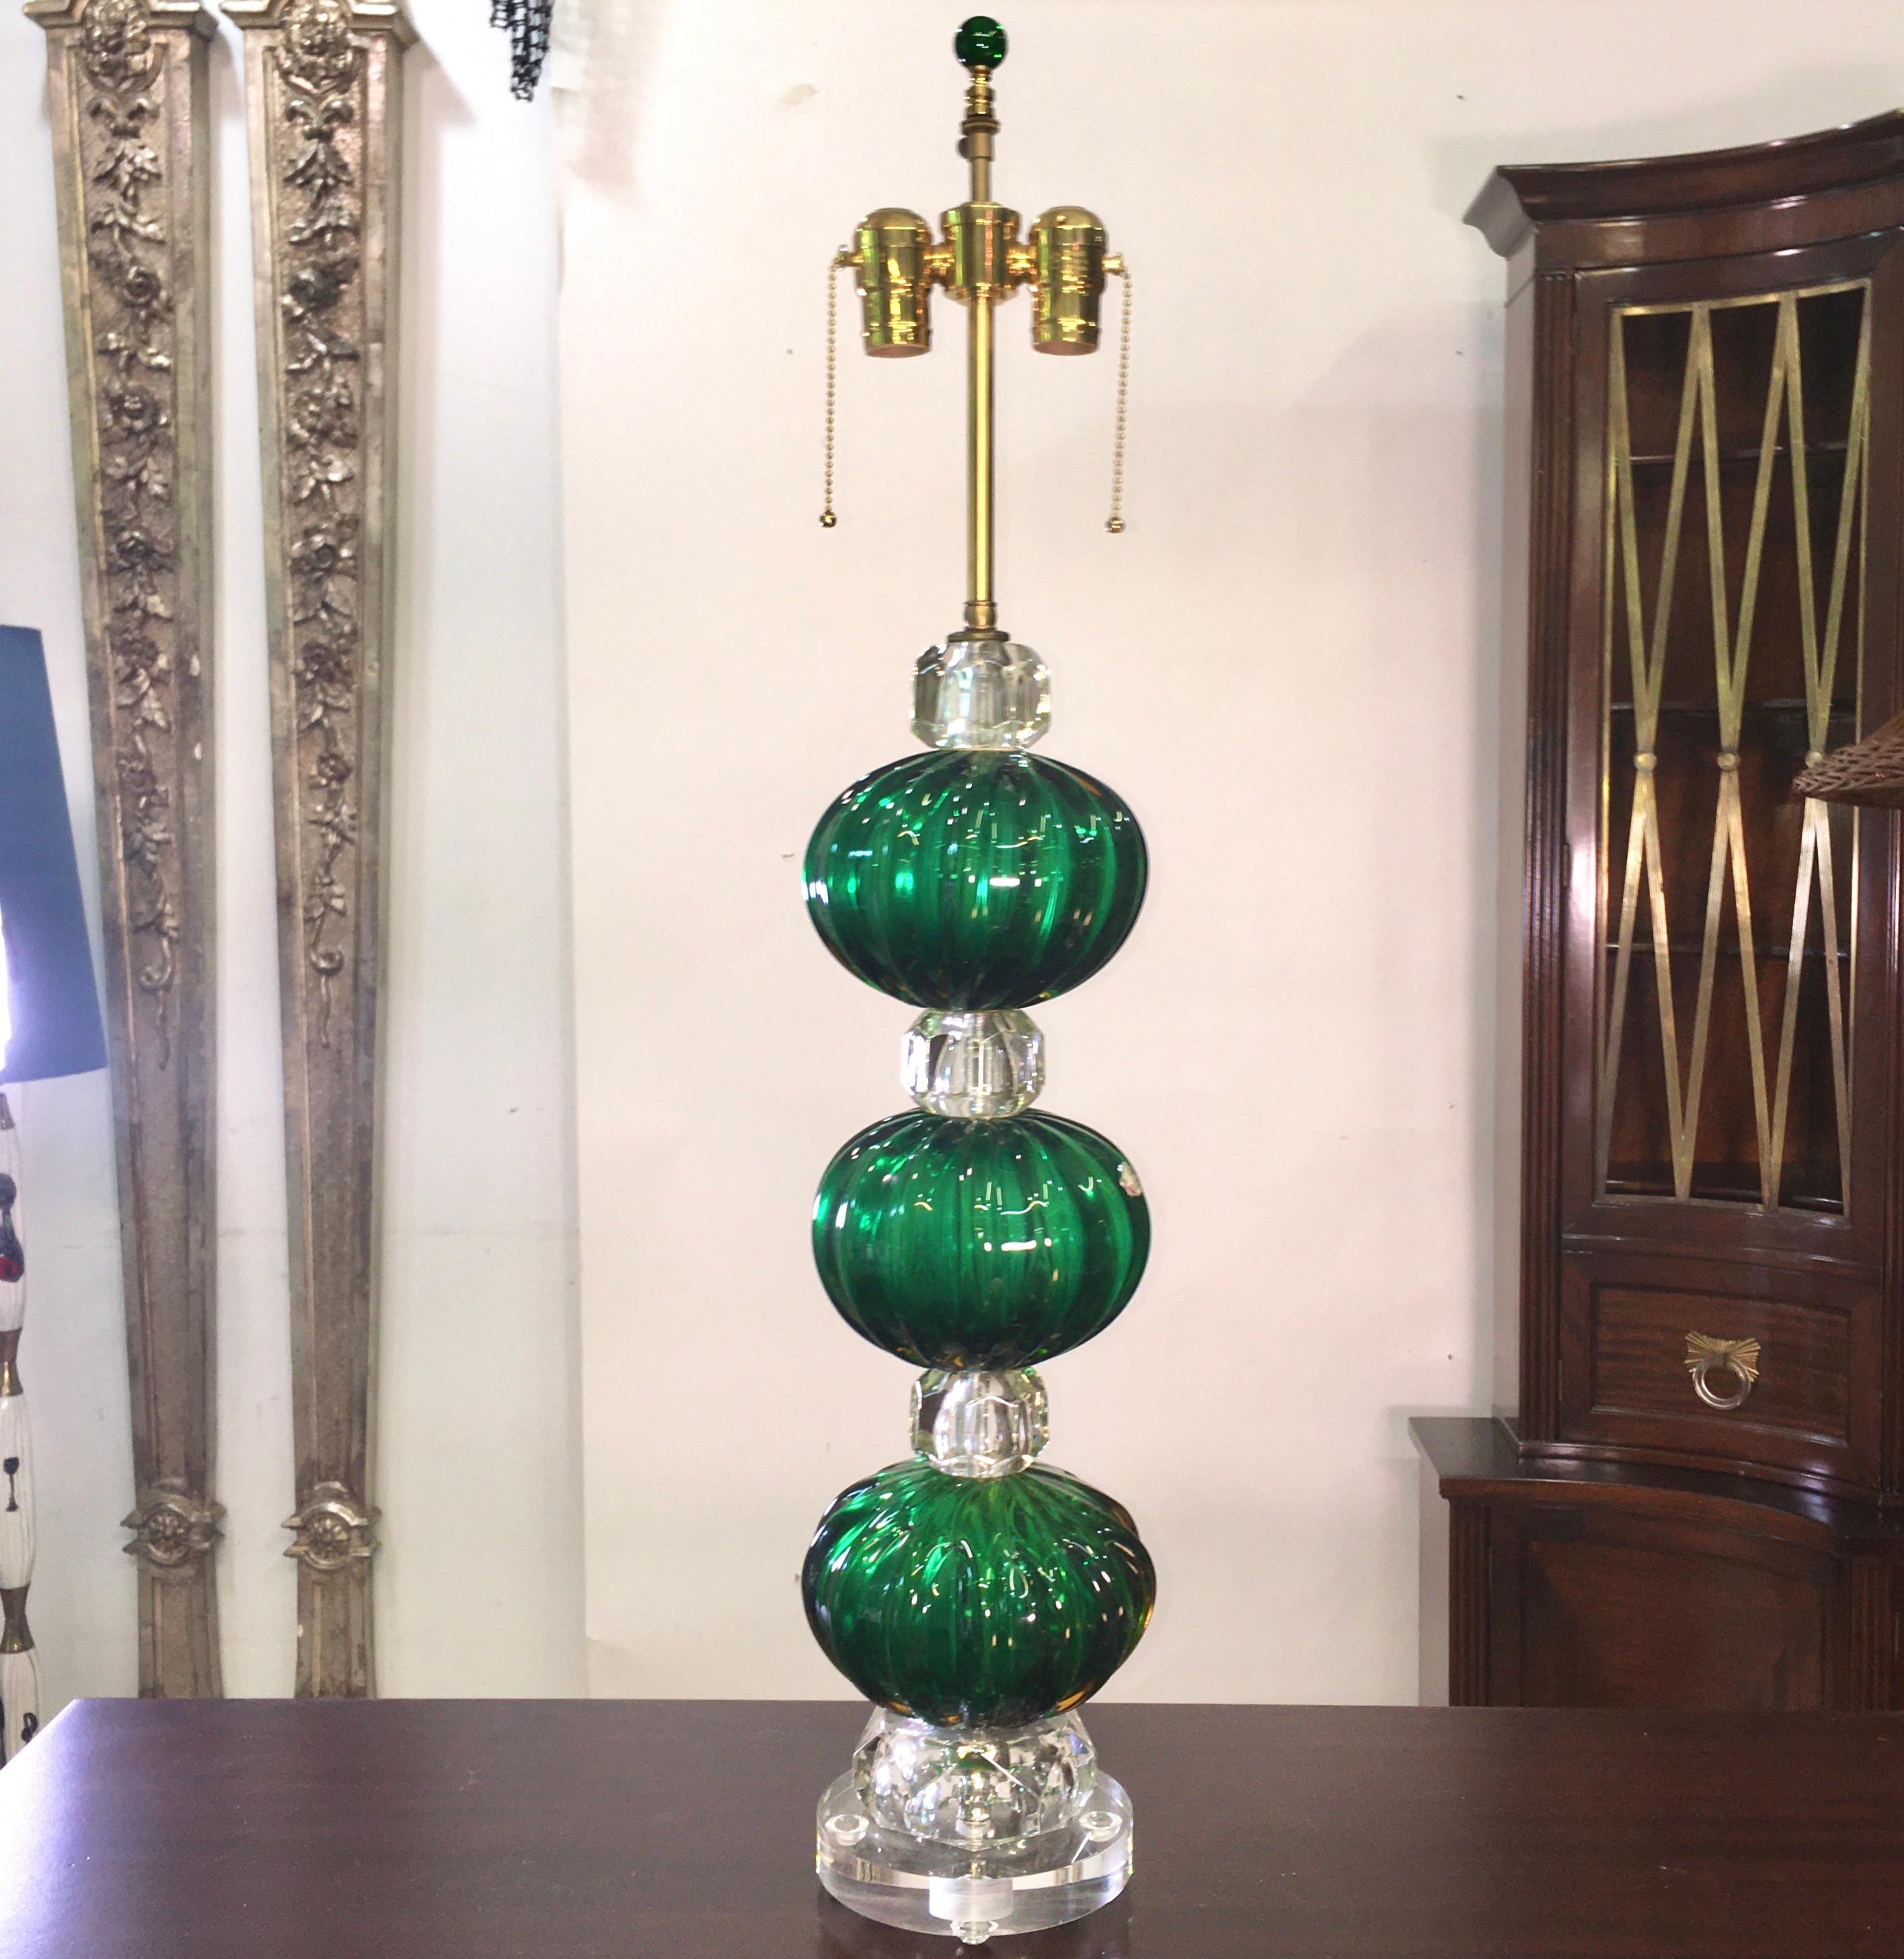 This knock-out lamp has been completely rebuilt and rewired using vintage Seguso Murano glass emerald green balls the size of cantaloupe, crystal spacers, lucite base and high quality solid brass lamp fittings. Height adjustable shade riser,